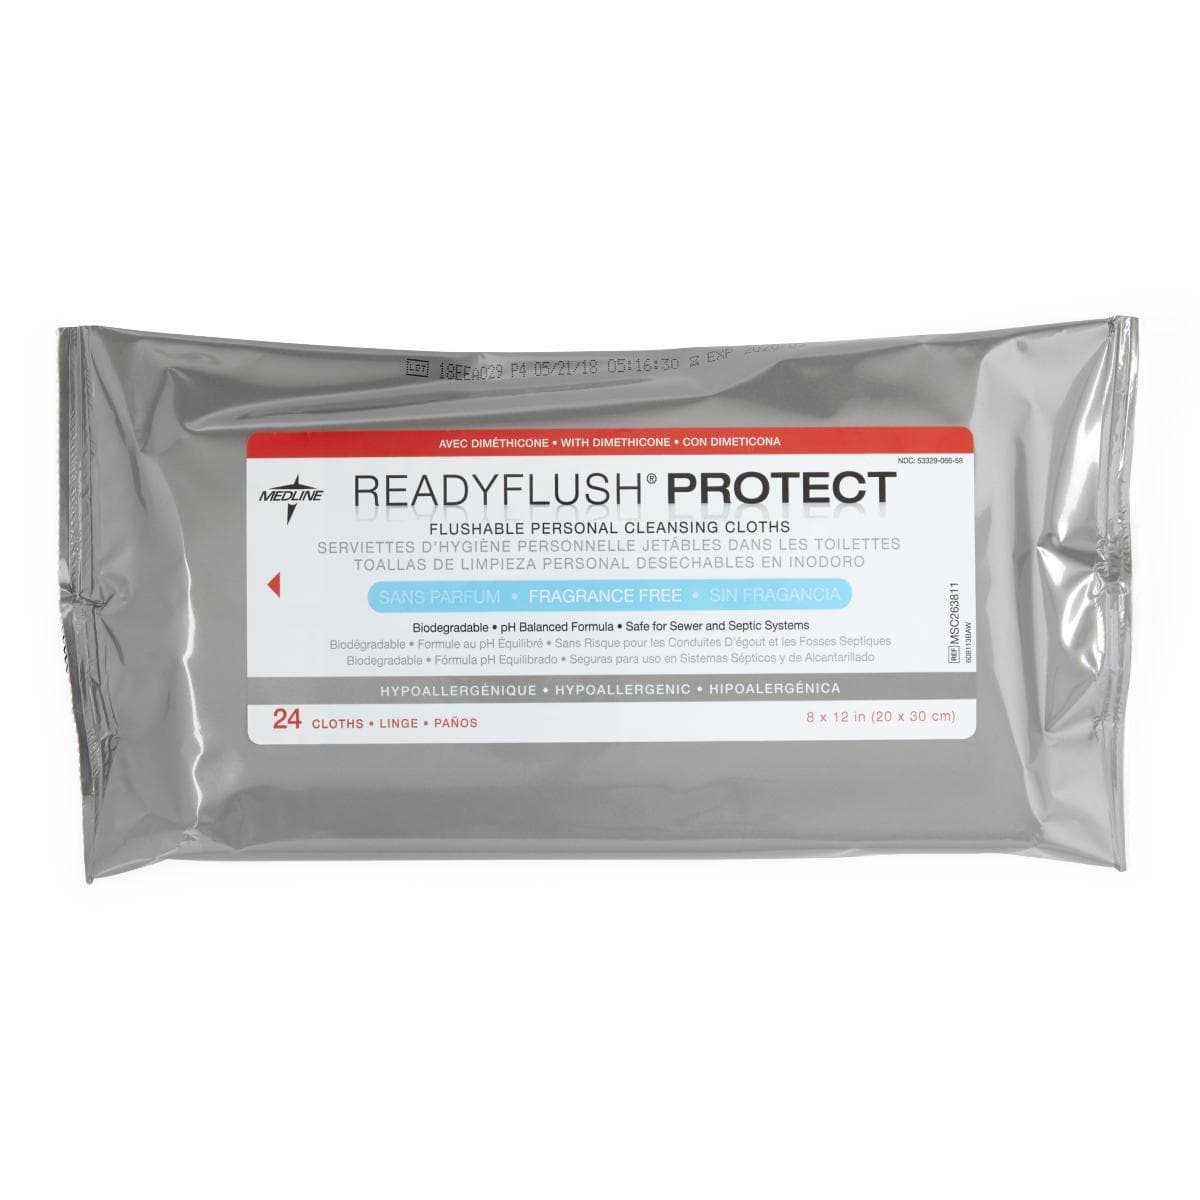 Medline ReadyFlush Biodegradable PROTECT Flushable Personal Cleansing Wipes - Senior.com Cleansing Wipes